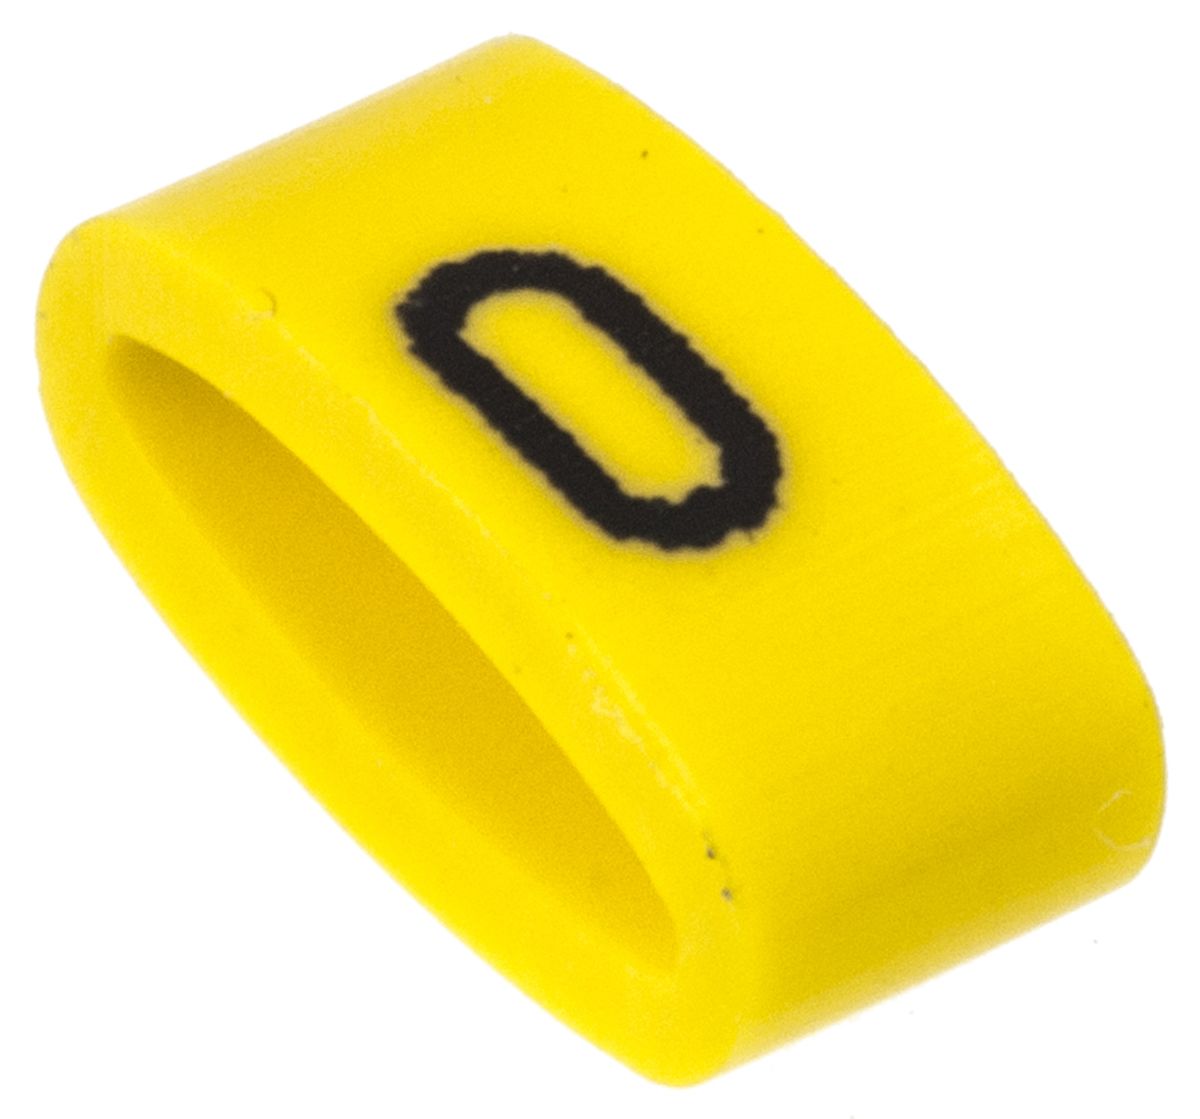 HellermannTyton Ovalgrip Slide On Cable Markers, Black on Yellow, Pre-printed "0", 2.5 → 6mm Cable